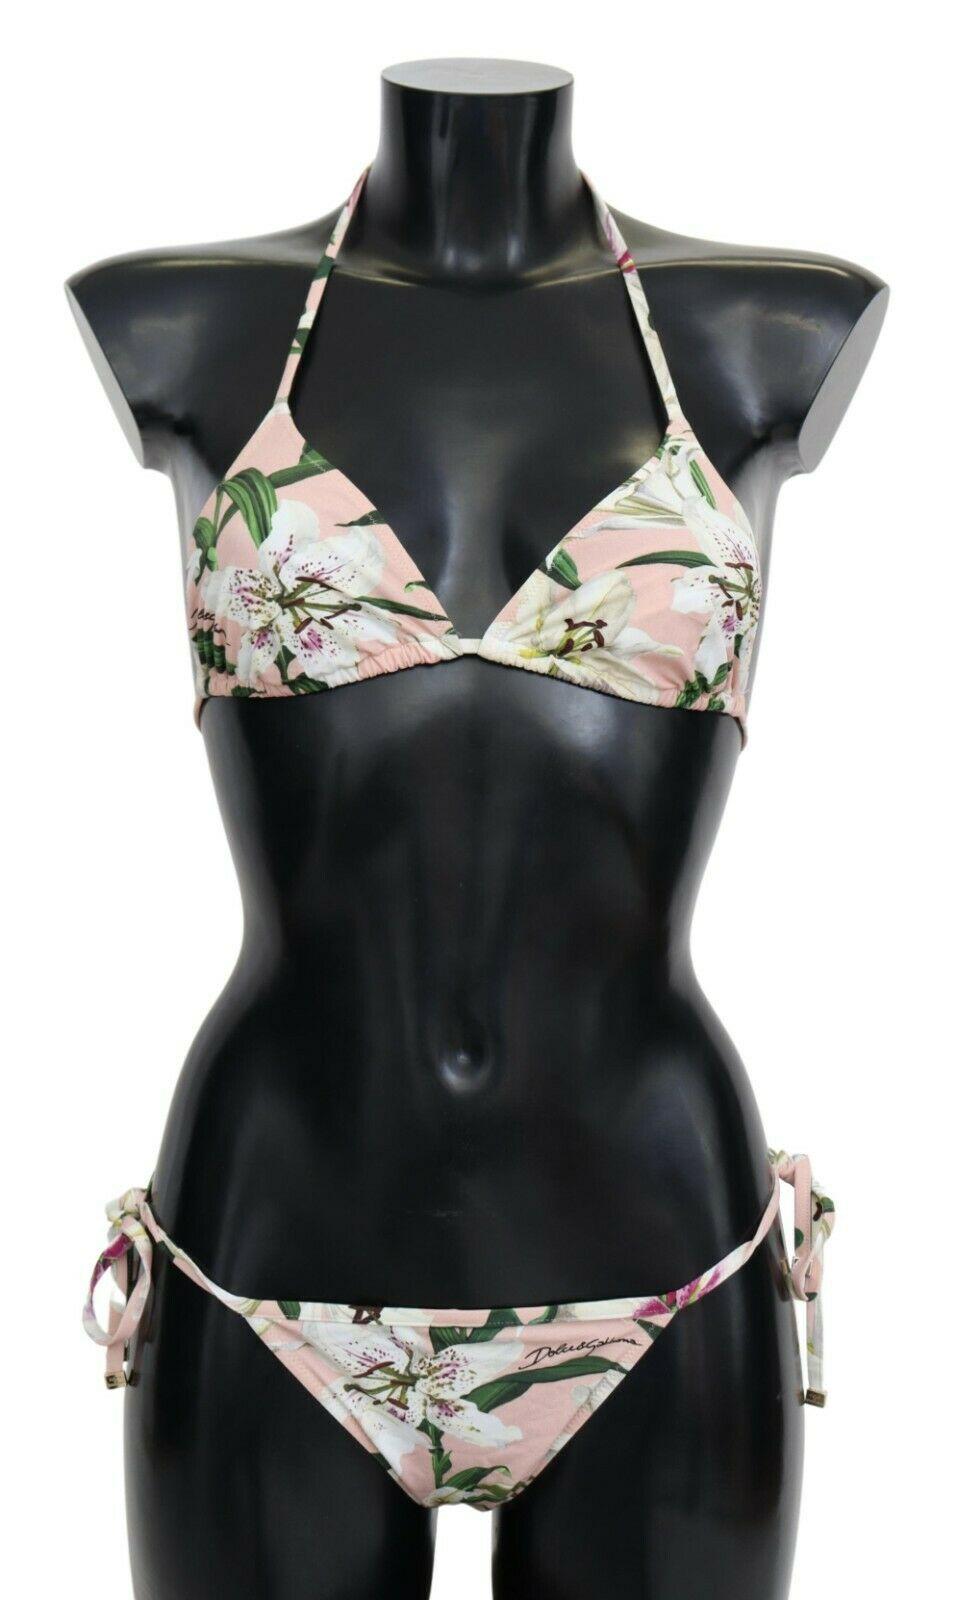 Gorgeous brand new with tags, 100% Authentic Dolce & Gabbana two piece bikini. 

Color: Pink with multicolor floral print

Model: Bikini two piece set, top and bottom

Material: 25% Elastane, 75% Polyamide

Logo detailing

Made in Italy

Size: IT2